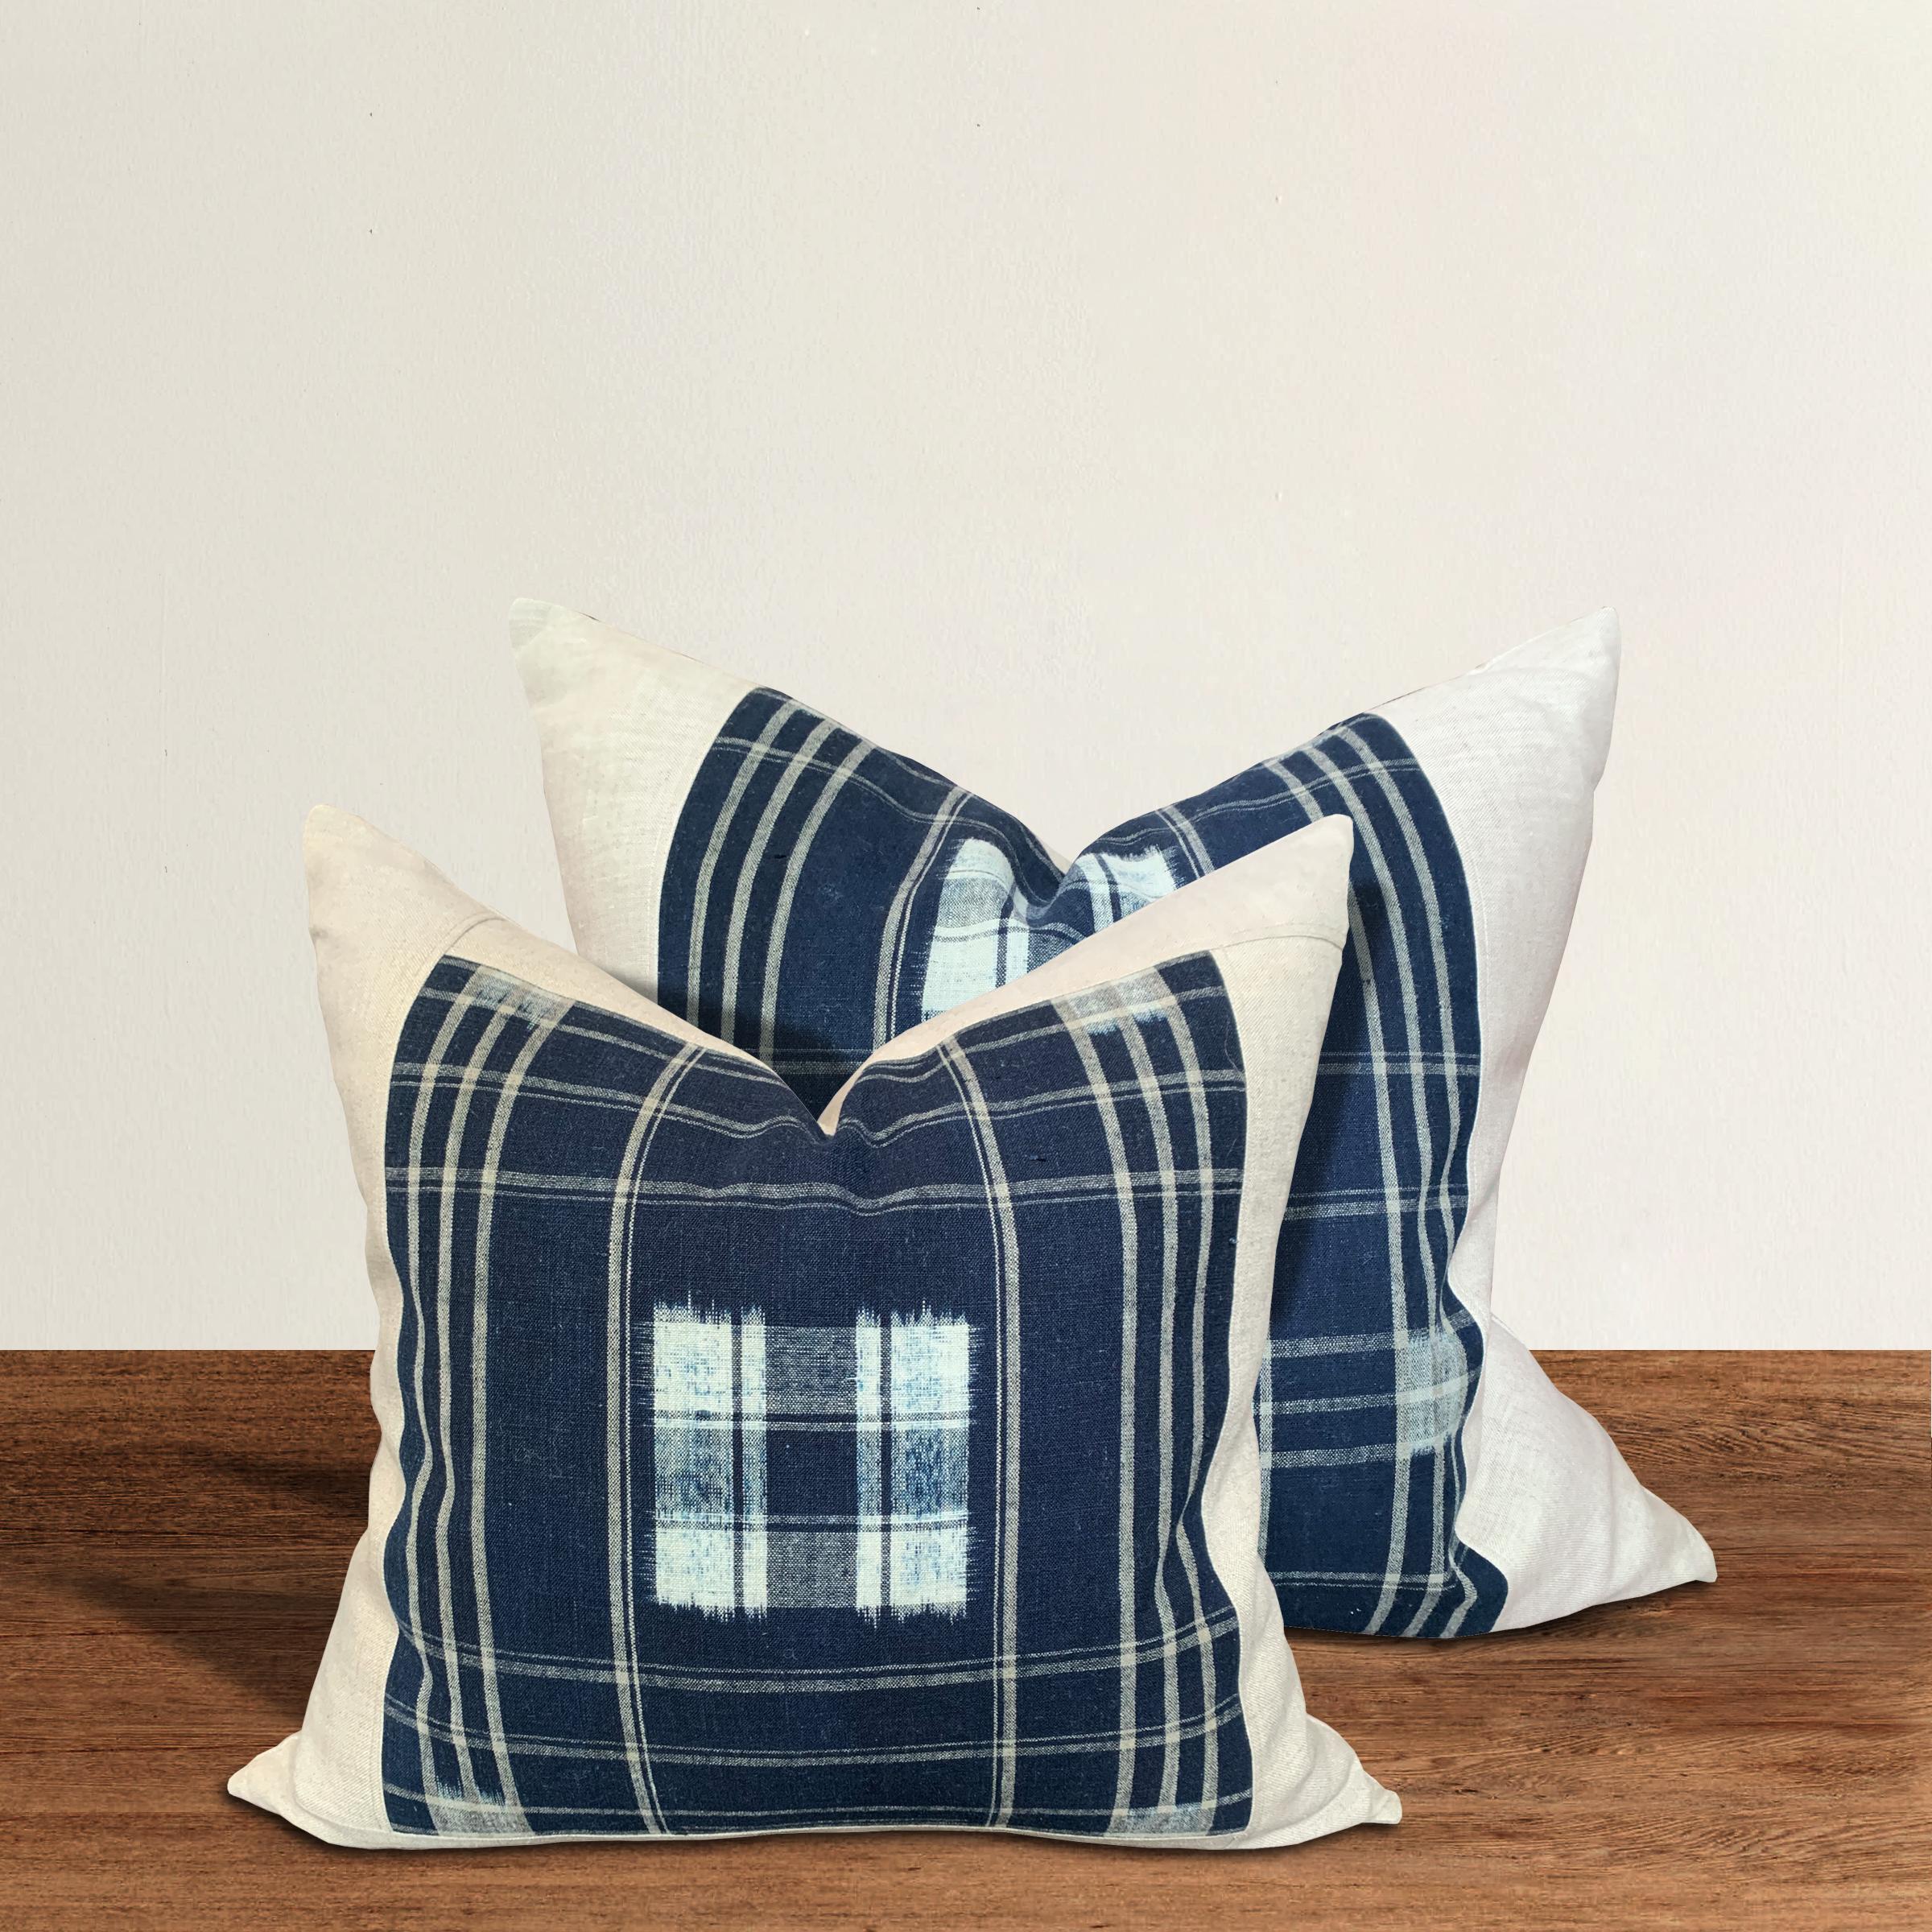 A set of pillows made from vintage Japanese handwoven blue and white indigo with a plaid pattern, filled with down. These pillows are slightly different sizes and slightly different patterns, making them a near pair.

Large: 21 in. W x 20 in.